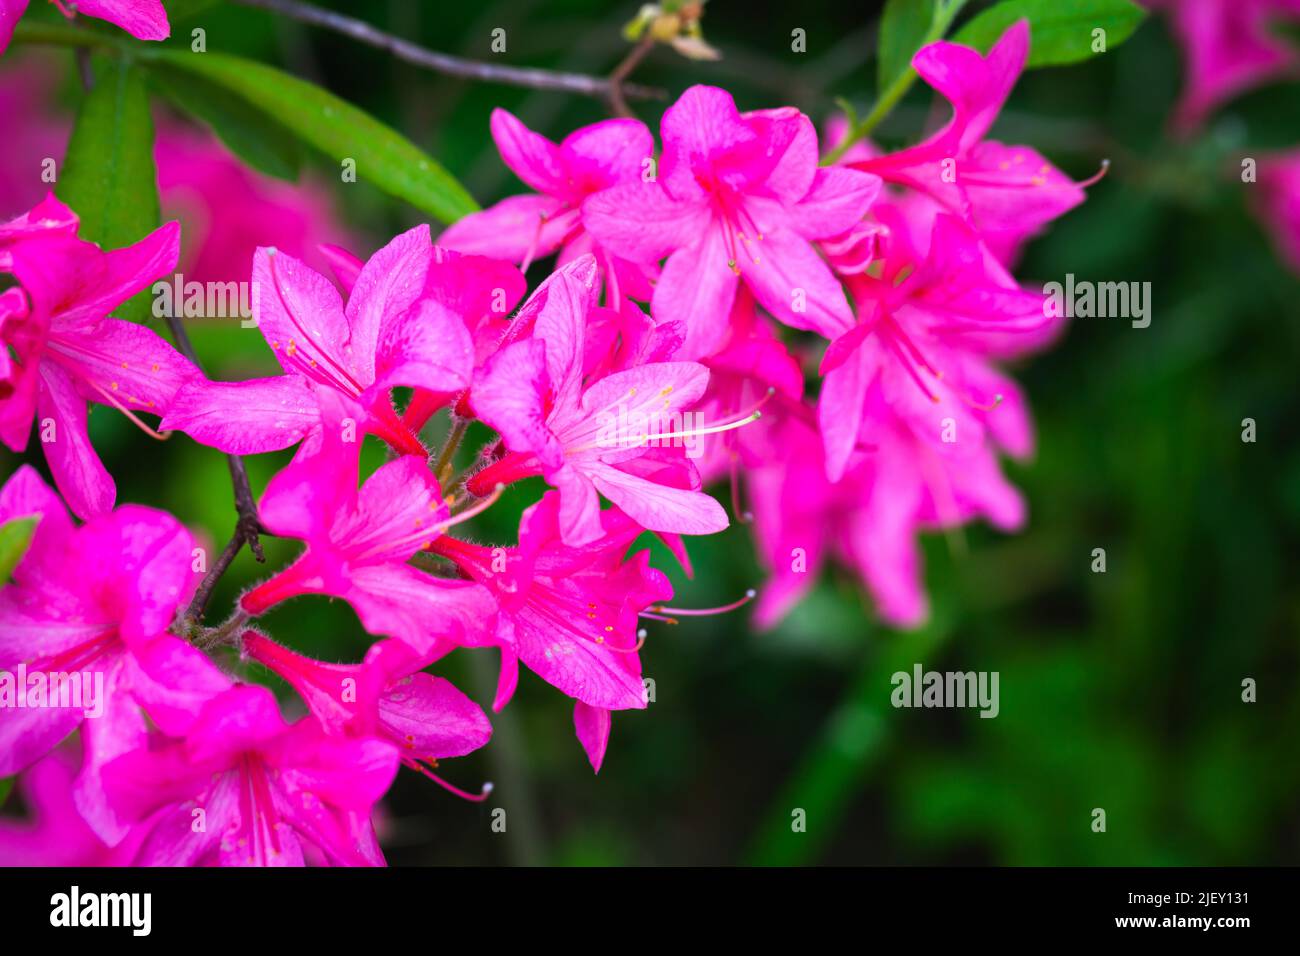 Pink flowers of Rhododendron prinophyllum, close up outdoor photo with selective soft focus Stock Photo